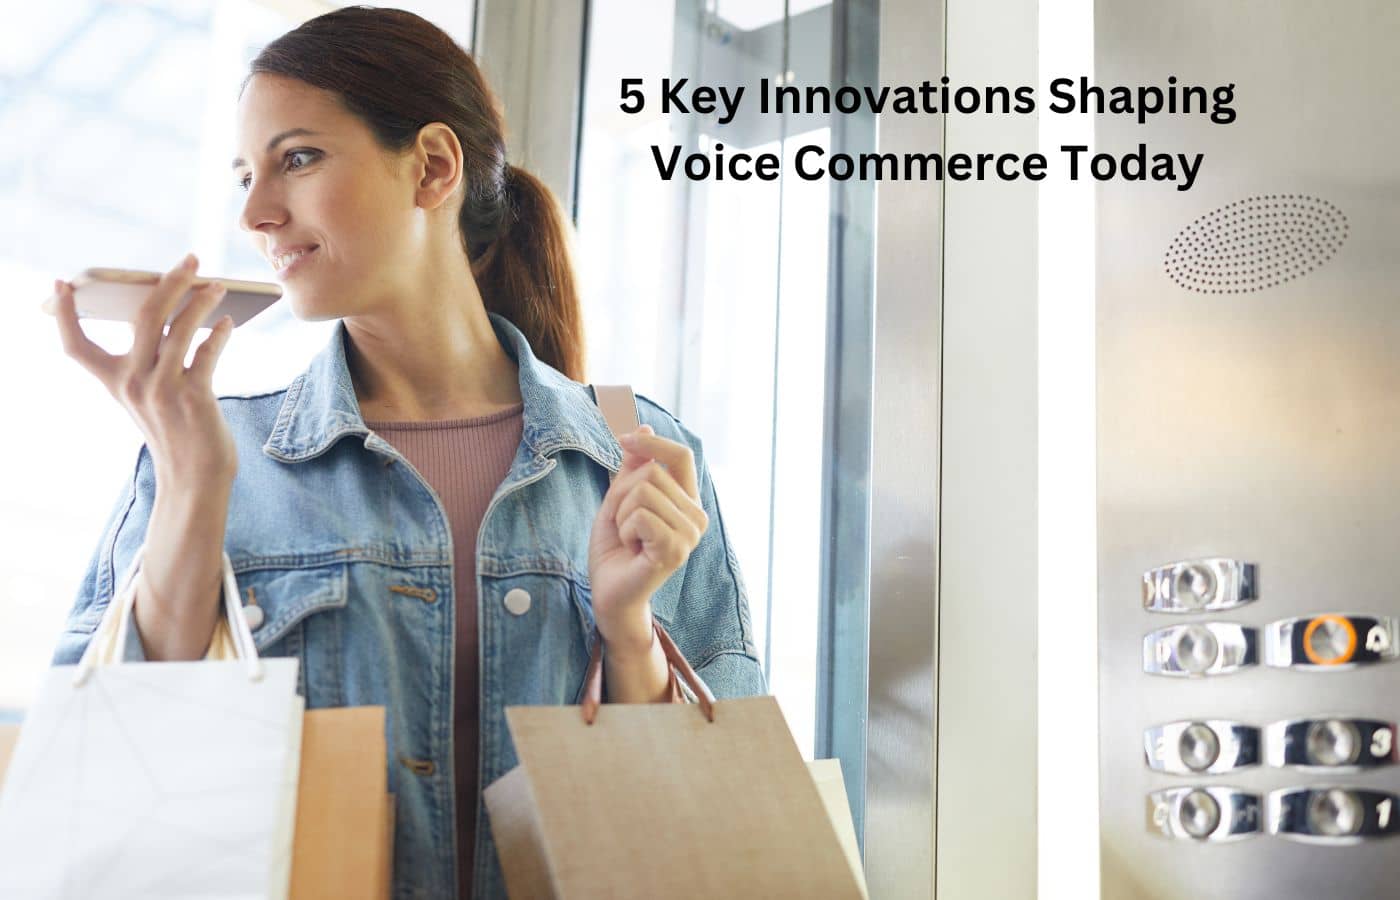 5 Key Innovations Shaping Voice Commerce Today